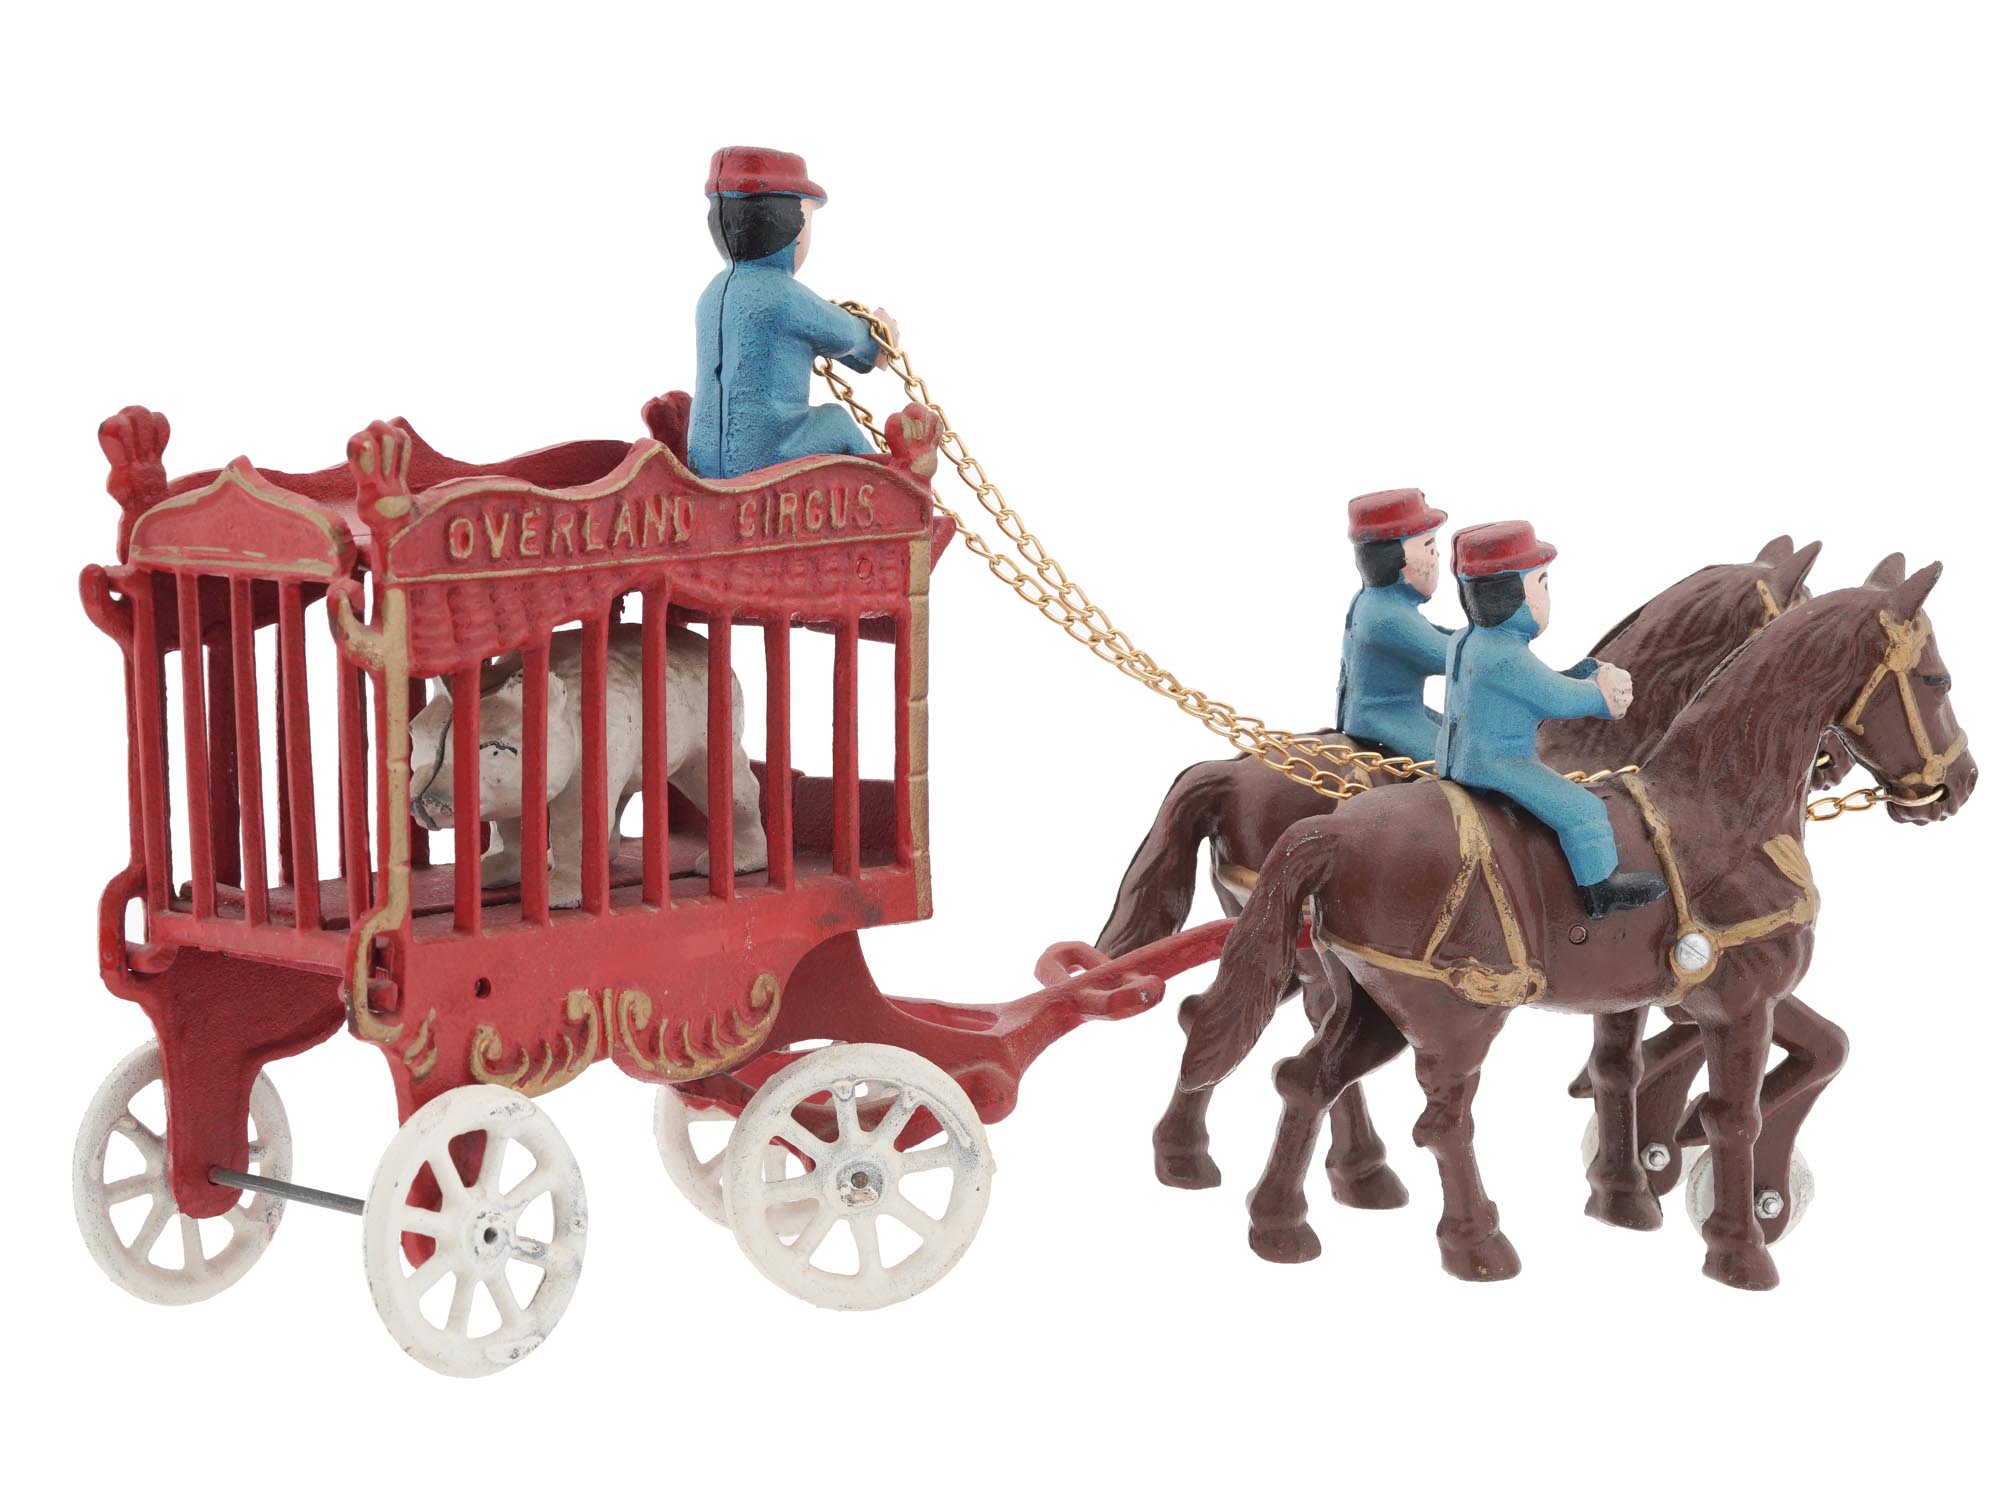 CAST IRON OVERLAND CIRCUS CAGE WAGON TOY C 1900 PIC-3